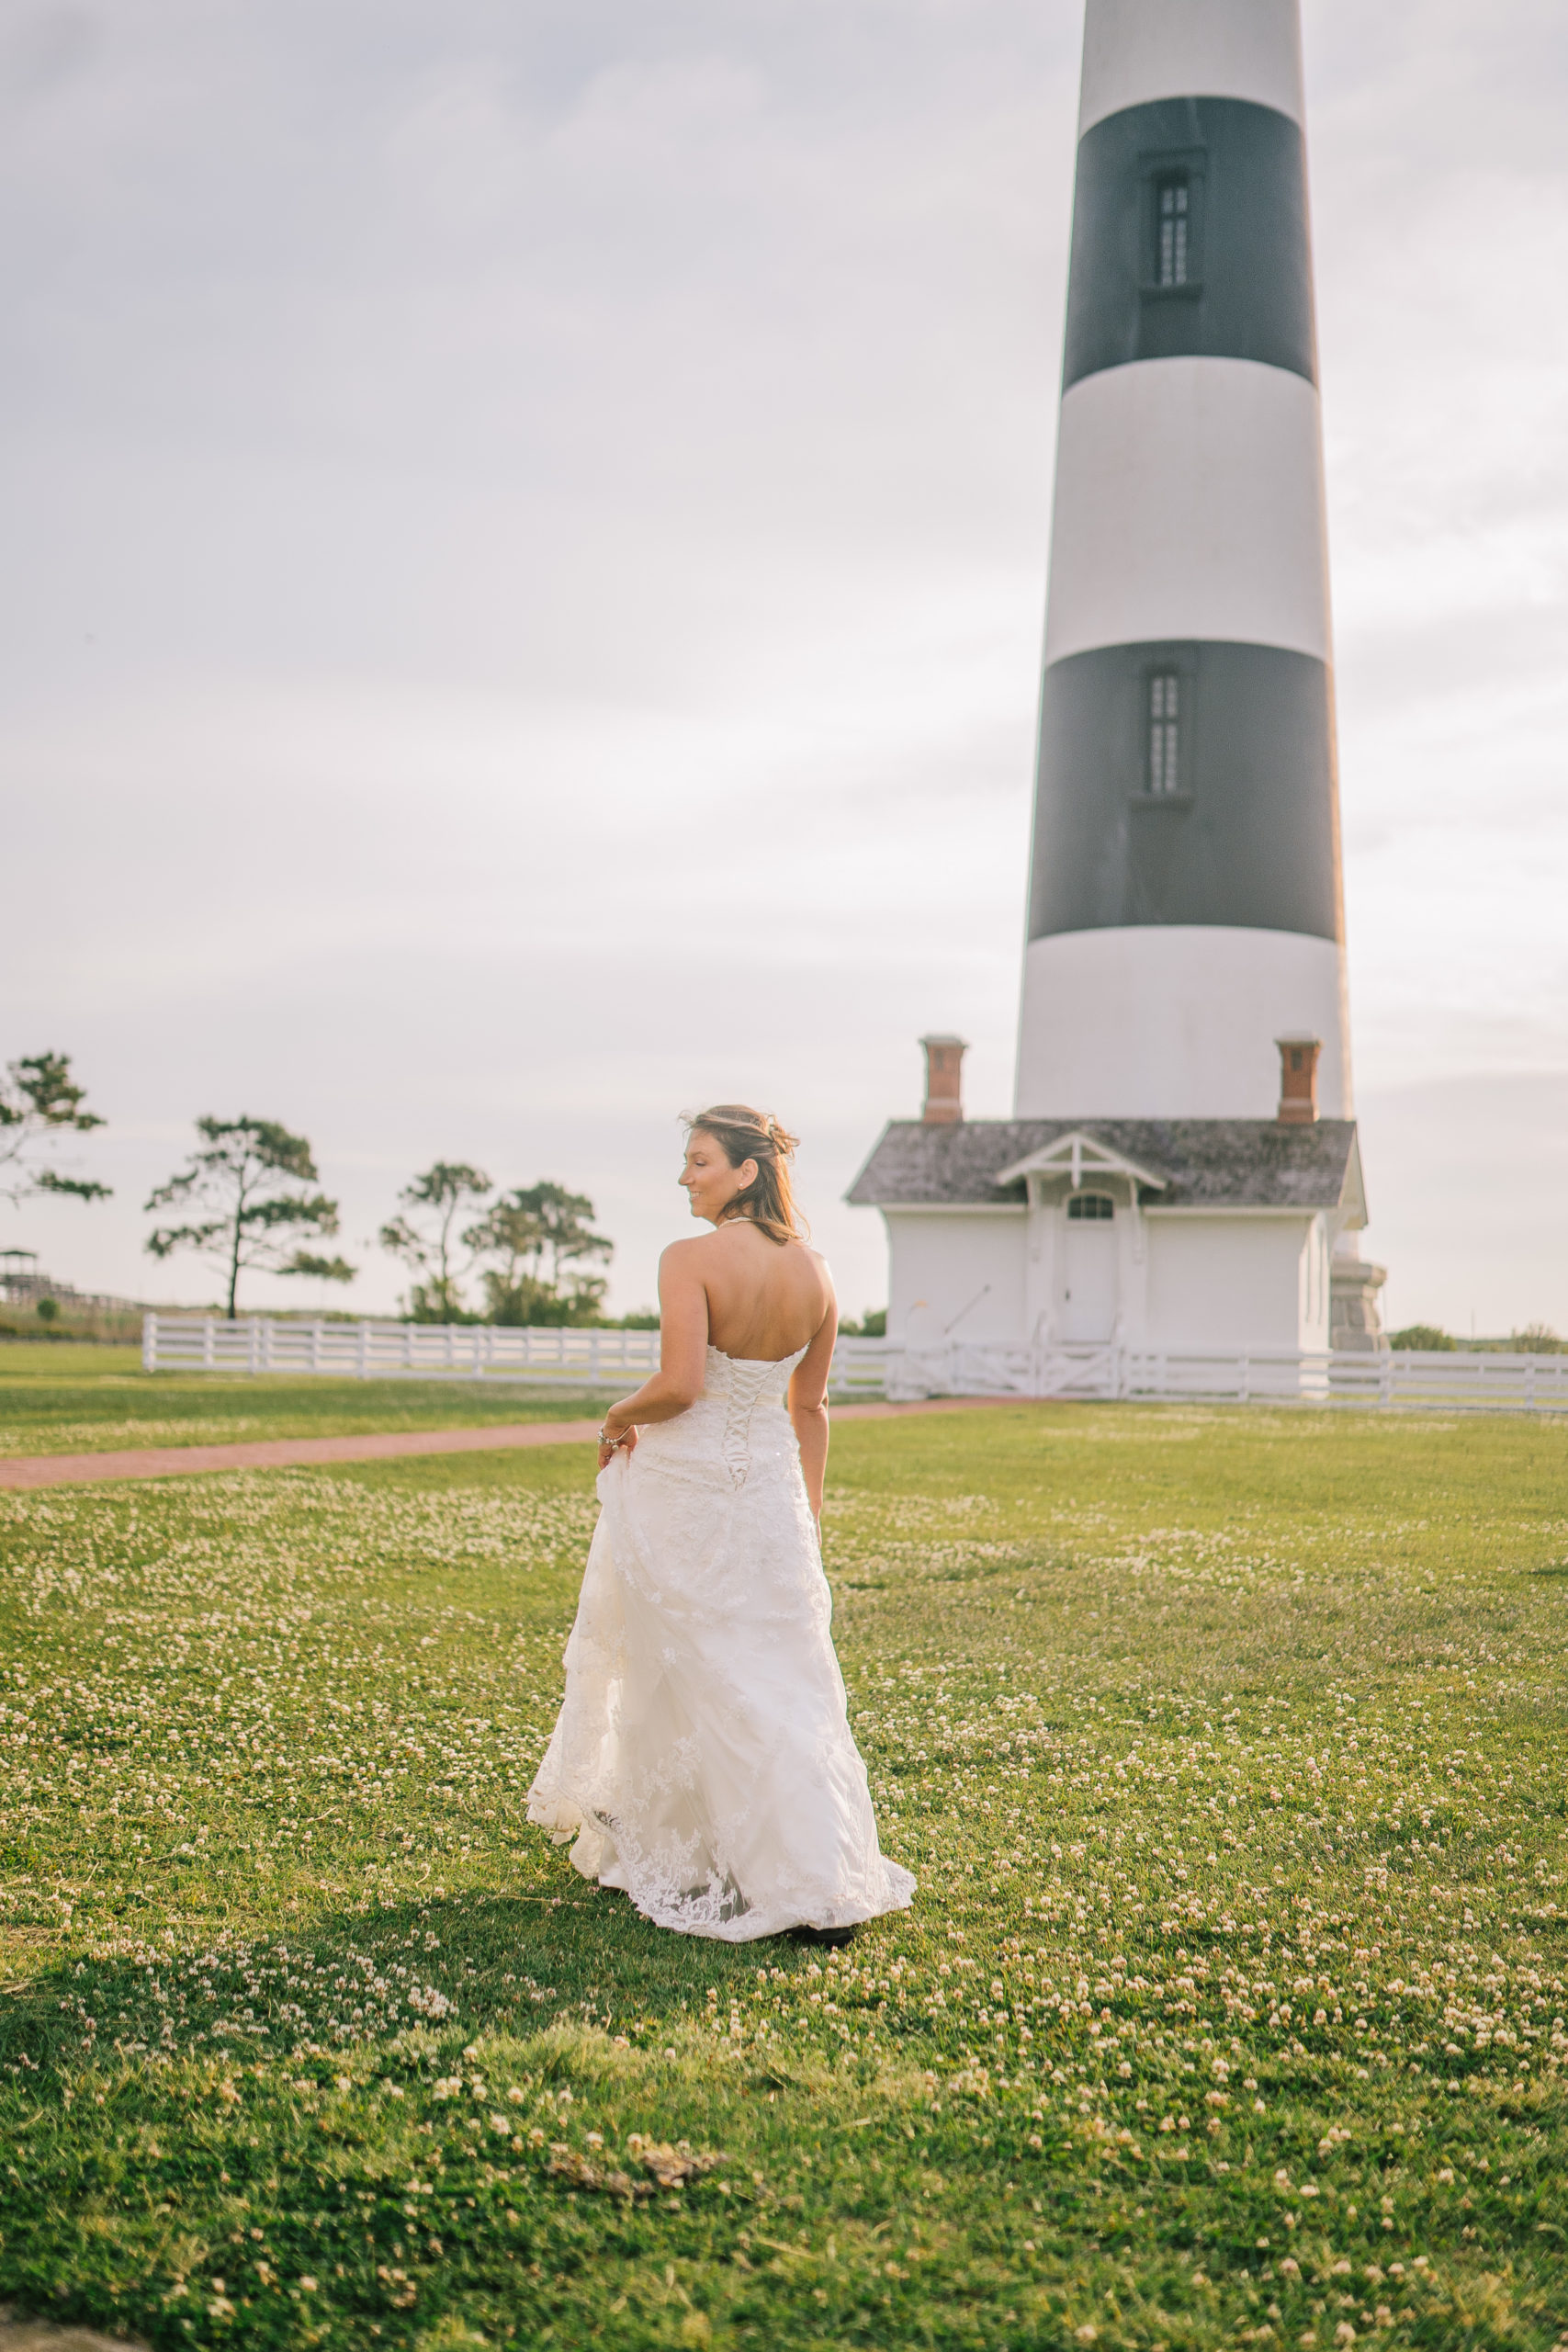 Bride ina lave mermaid gown walks on a green field on the East coast towards a striped black and white light house